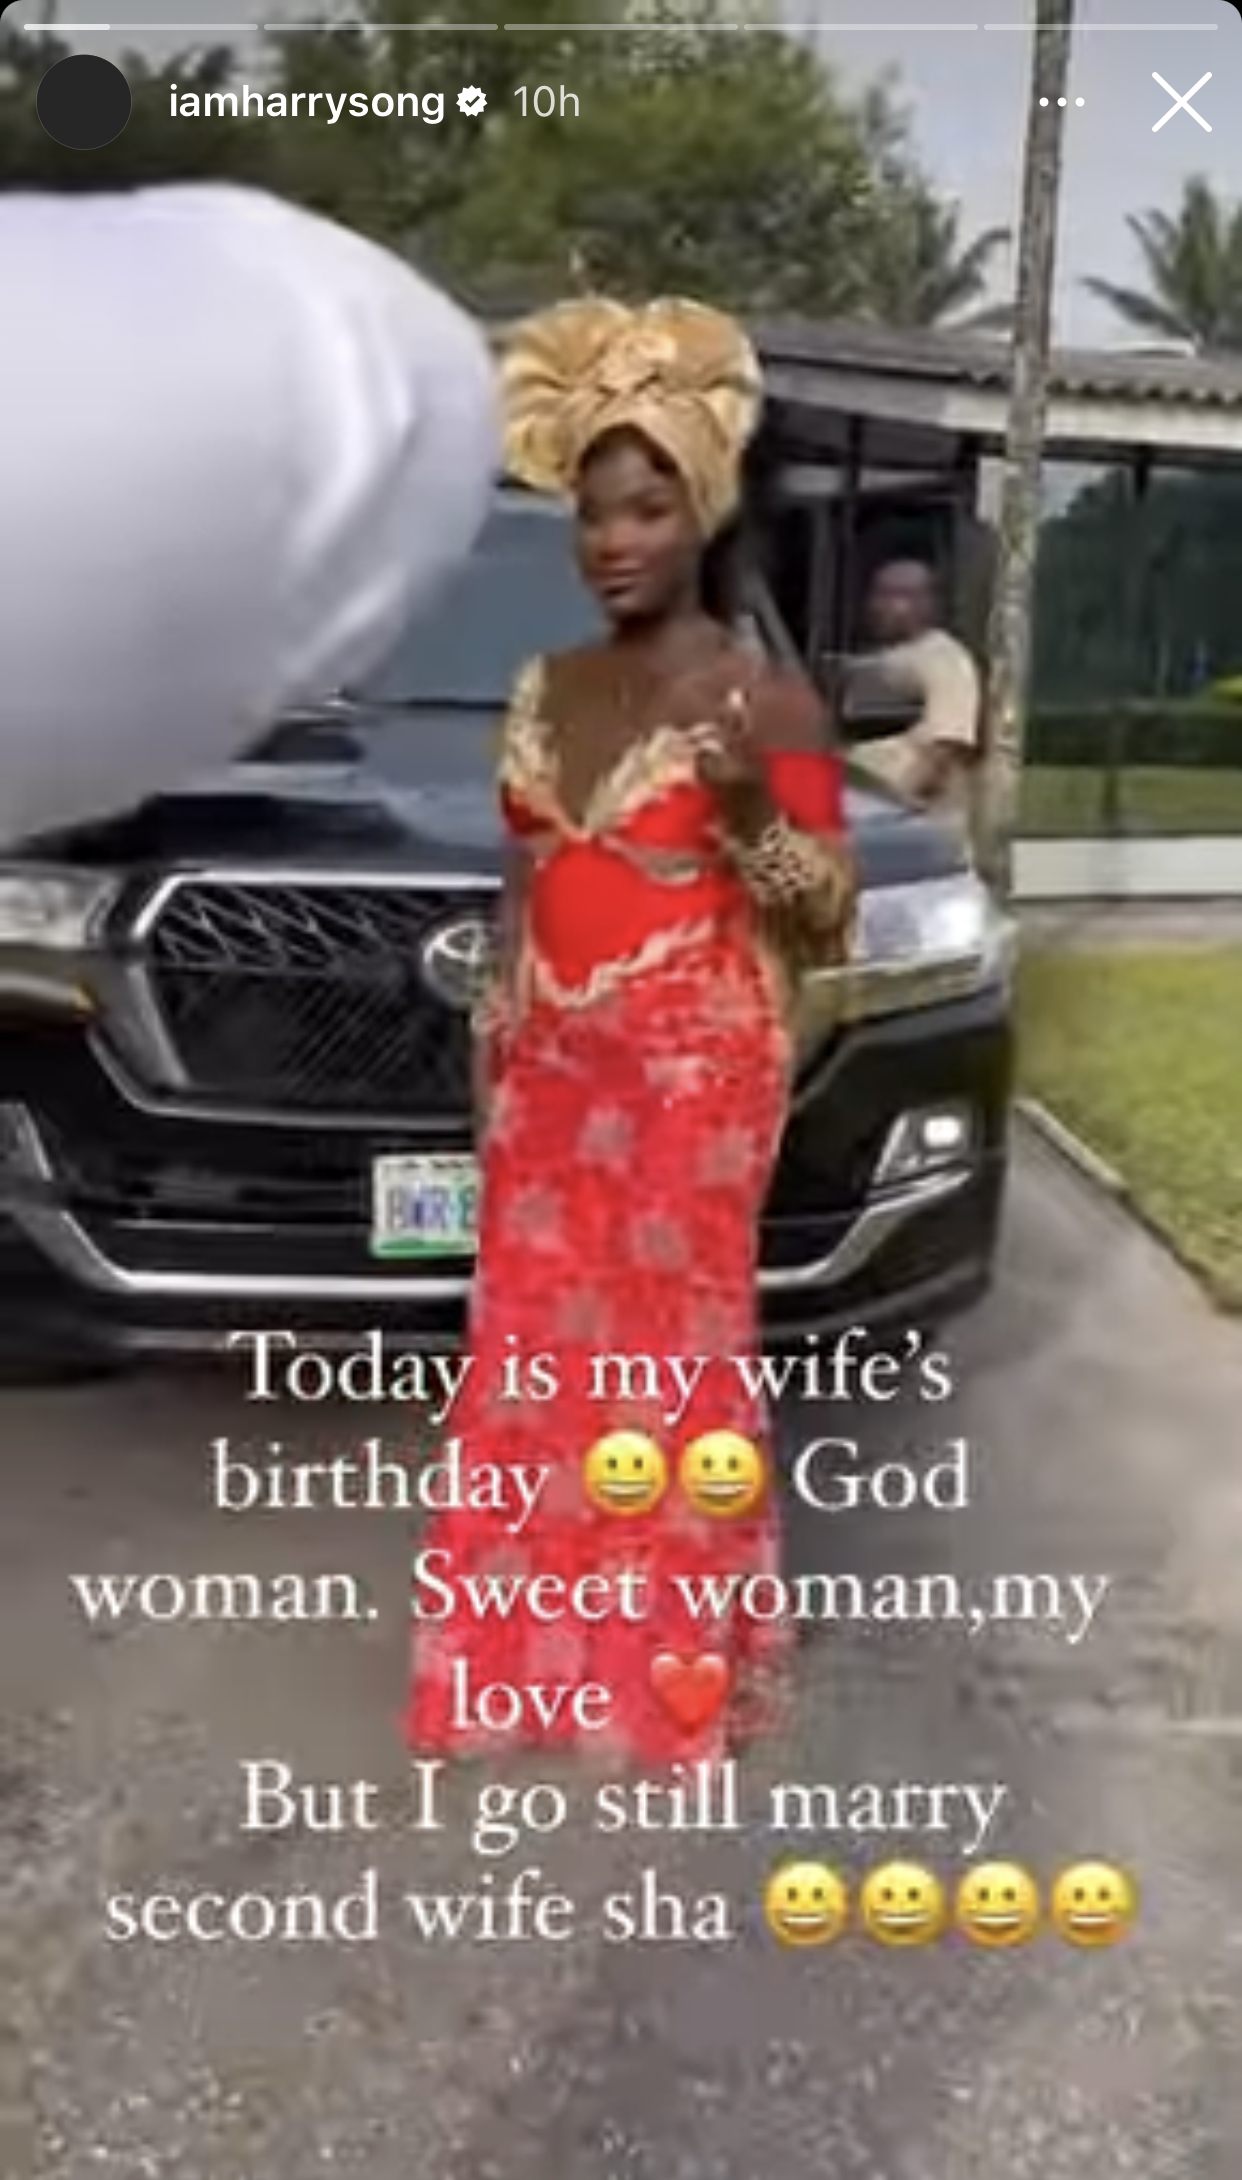 Harrysong Jokingly Tells His Wife He Would Marry Another Woman As He Celebrates Her Birthday 